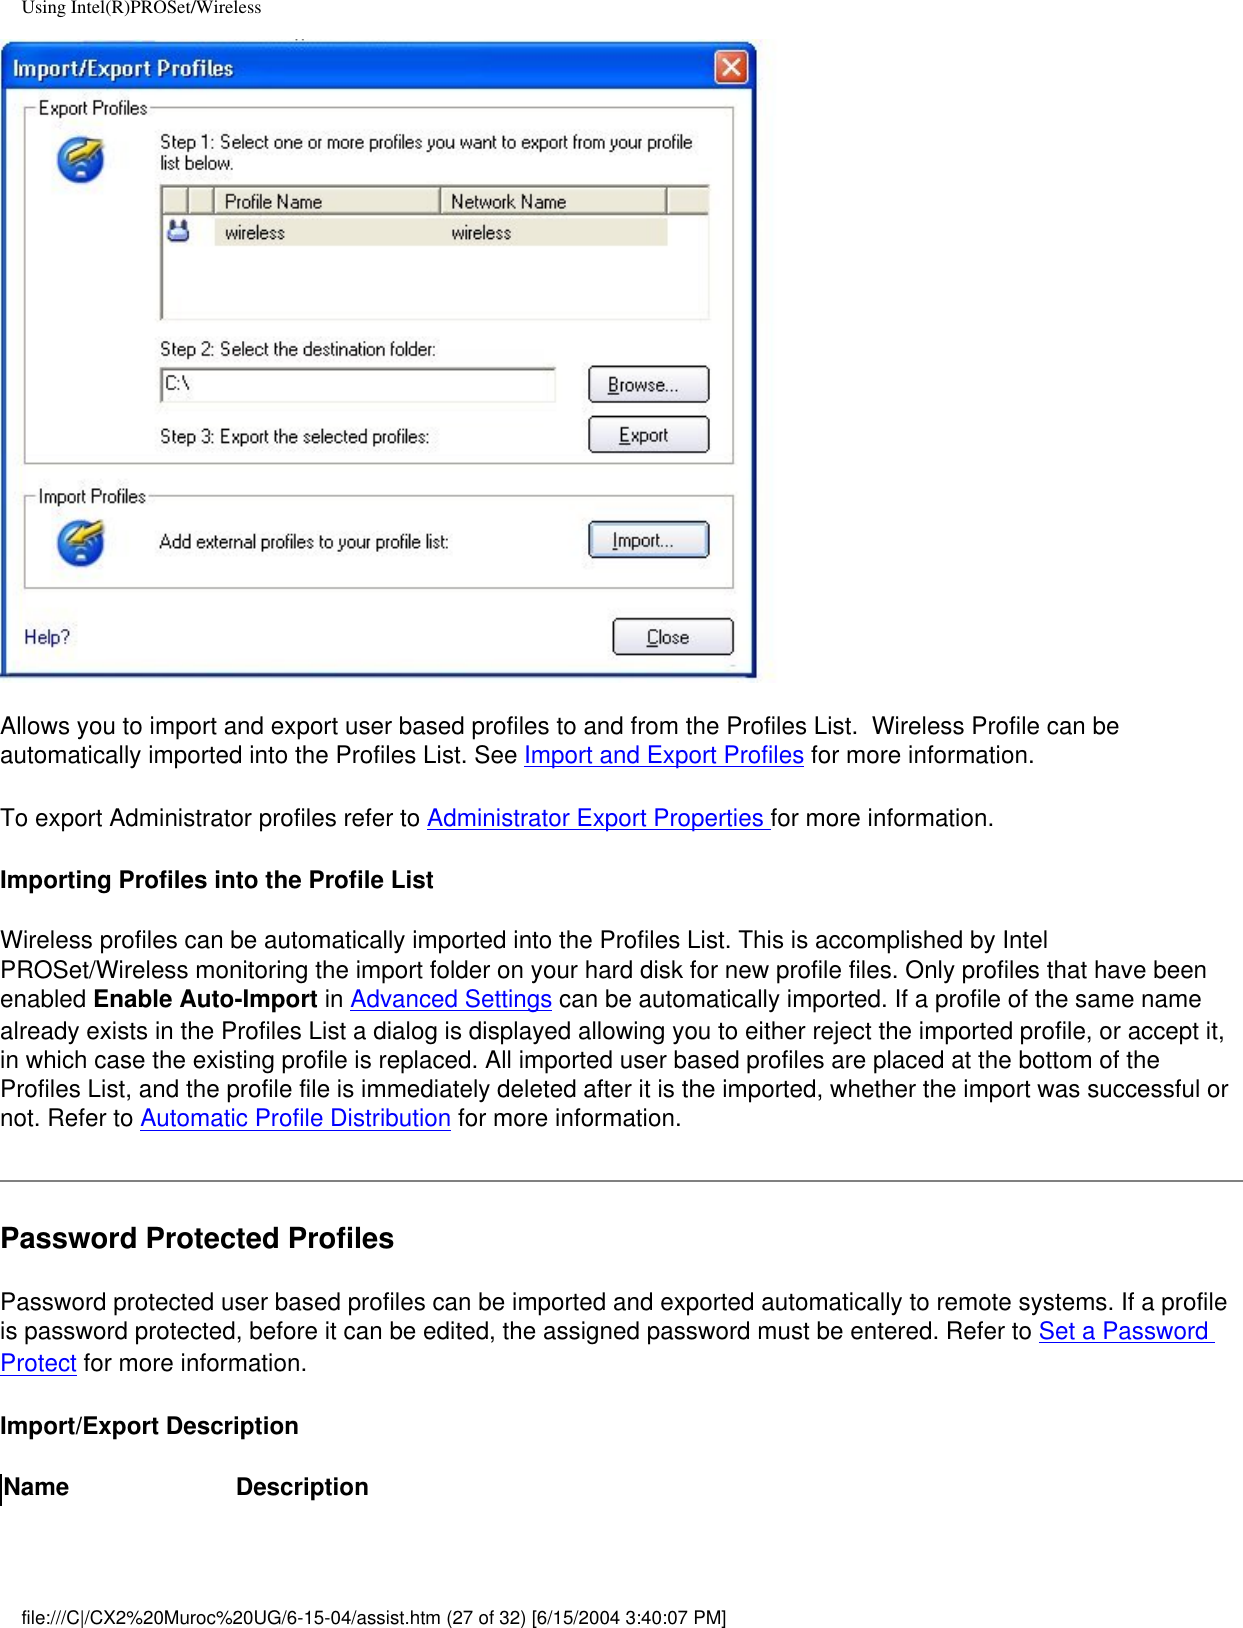 Using Intel(R)PROSet/WirelessAllows you to import and export user based profiles to and from the Profiles List.  Wireless Profile can be automatically imported into the Profiles List. See Import and Export Profiles for more information.To export Administrator profiles refer to Administrator Export Properties for more information.Importing Profiles into the Profile ListWireless profiles can be automatically imported into the Profiles List. This is accomplished by Intel PROSet/Wireless monitoring the import folder on your hard disk for new profile files. Only profiles that have been enabled Enable Auto-Import in Advanced Settings can be automatically imported. If a profile of the same name already exists in the Profiles List a dialog is displayed allowing you to either reject the imported profile, or accept it, in which case the existing profile is replaced. All imported user based profiles are placed at the bottom of the Profiles List, and the profile file is immediately deleted after it is the imported, whether the import was successful or not. Refer to Automatic Profile Distribution for more information. Password Protected ProfilesPassword protected user based profiles can be imported and exported automatically to remote systems. If a profile is password protected, before it can be edited, the assigned password must be entered. Refer to Set a Password Protect for more information. Import/Export DescriptionName Descriptionfile:///C|/CX2%20Muroc%20UG/6-15-04/assist.htm (27 of 32) [6/15/2004 3:40:07 PM]